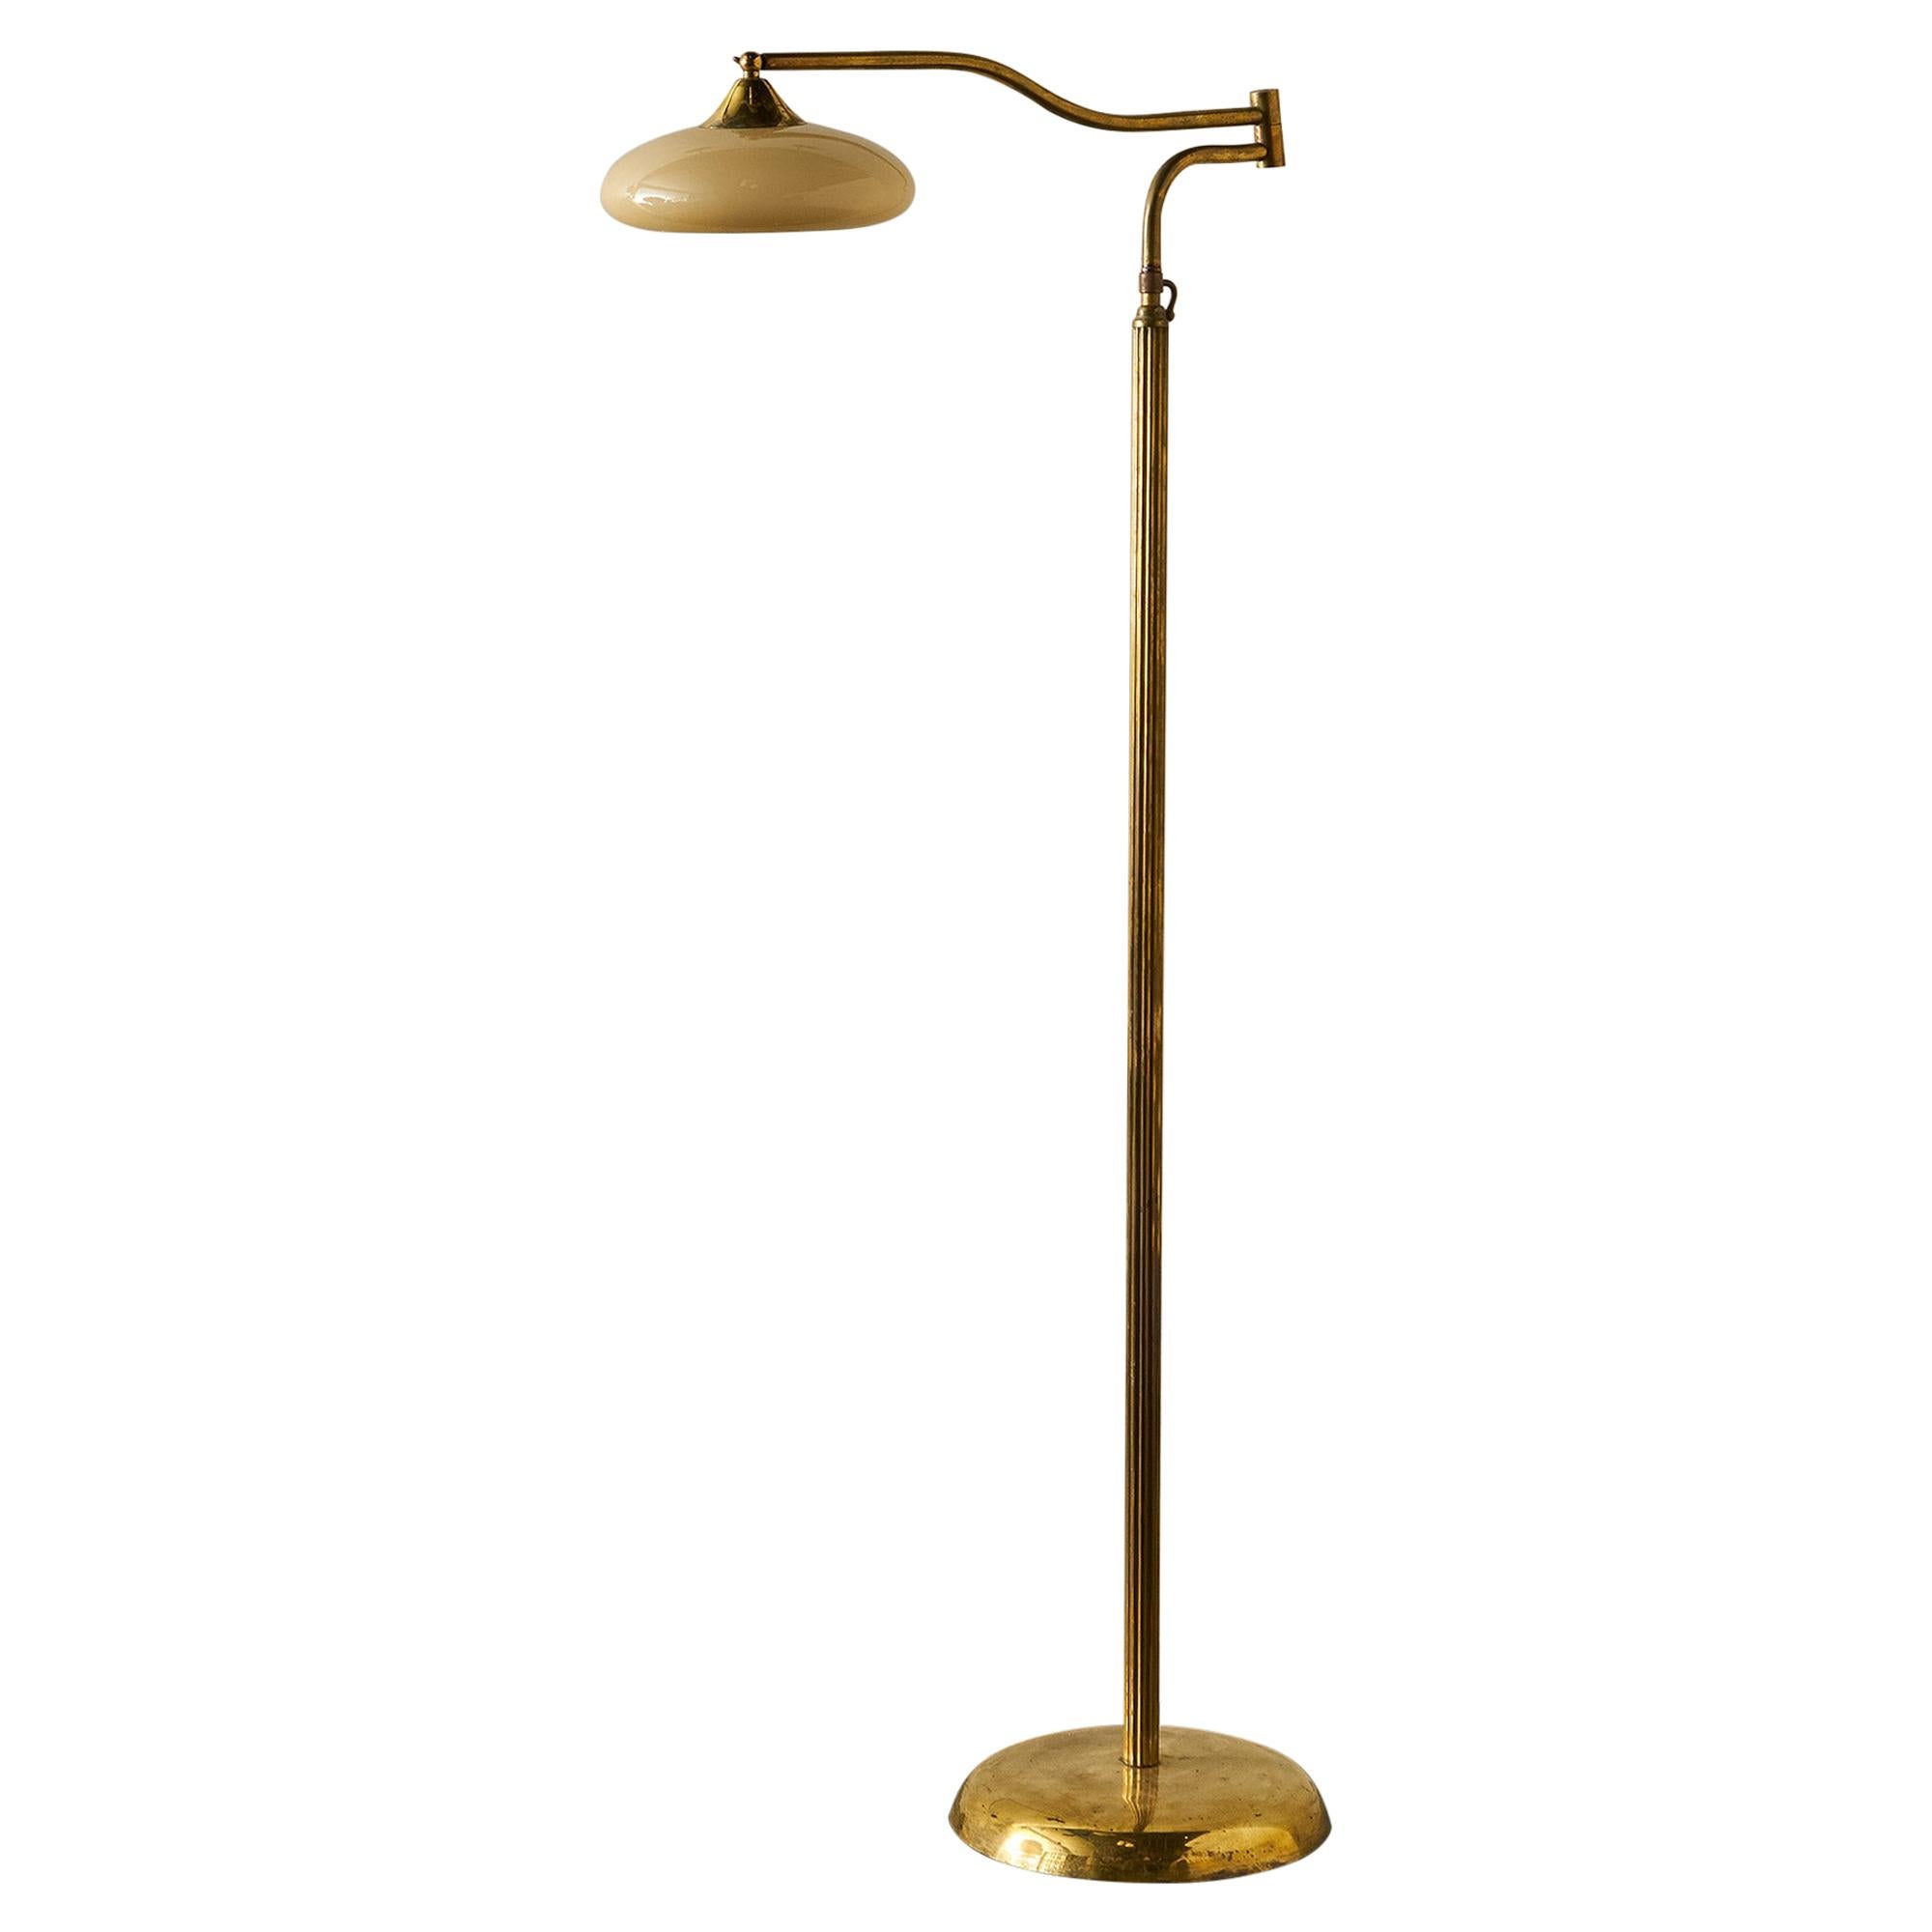 1930s Articulating Brass Floor Lamp with Opaline Shade